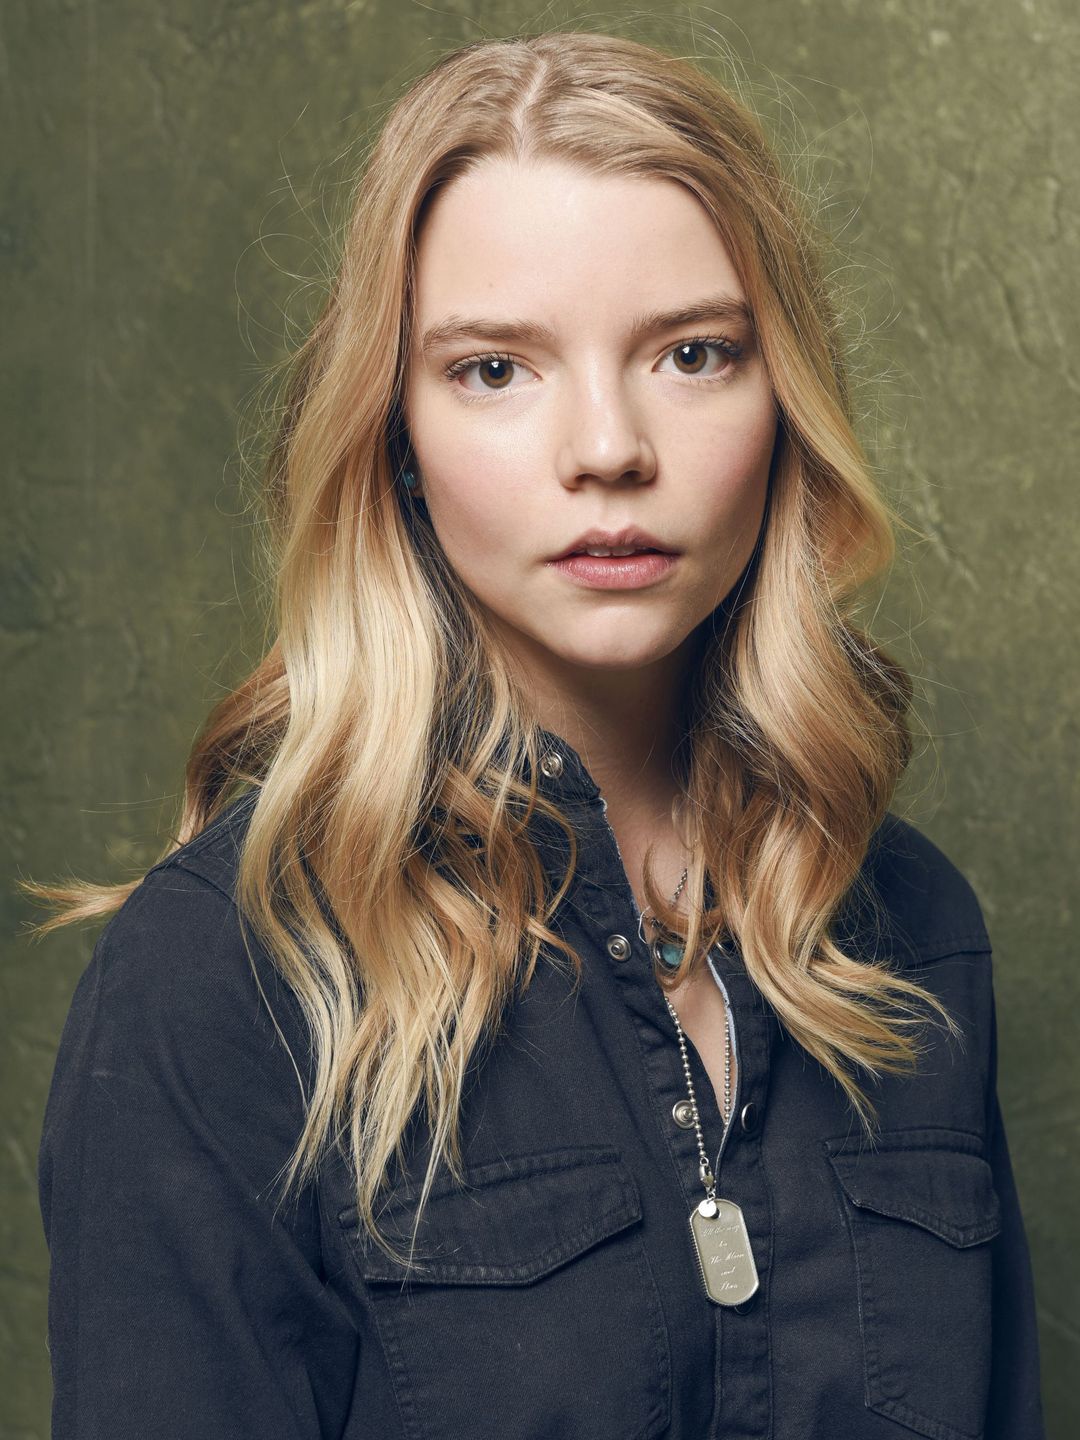 Anya Taylor-Joy unphotoshopped pictures